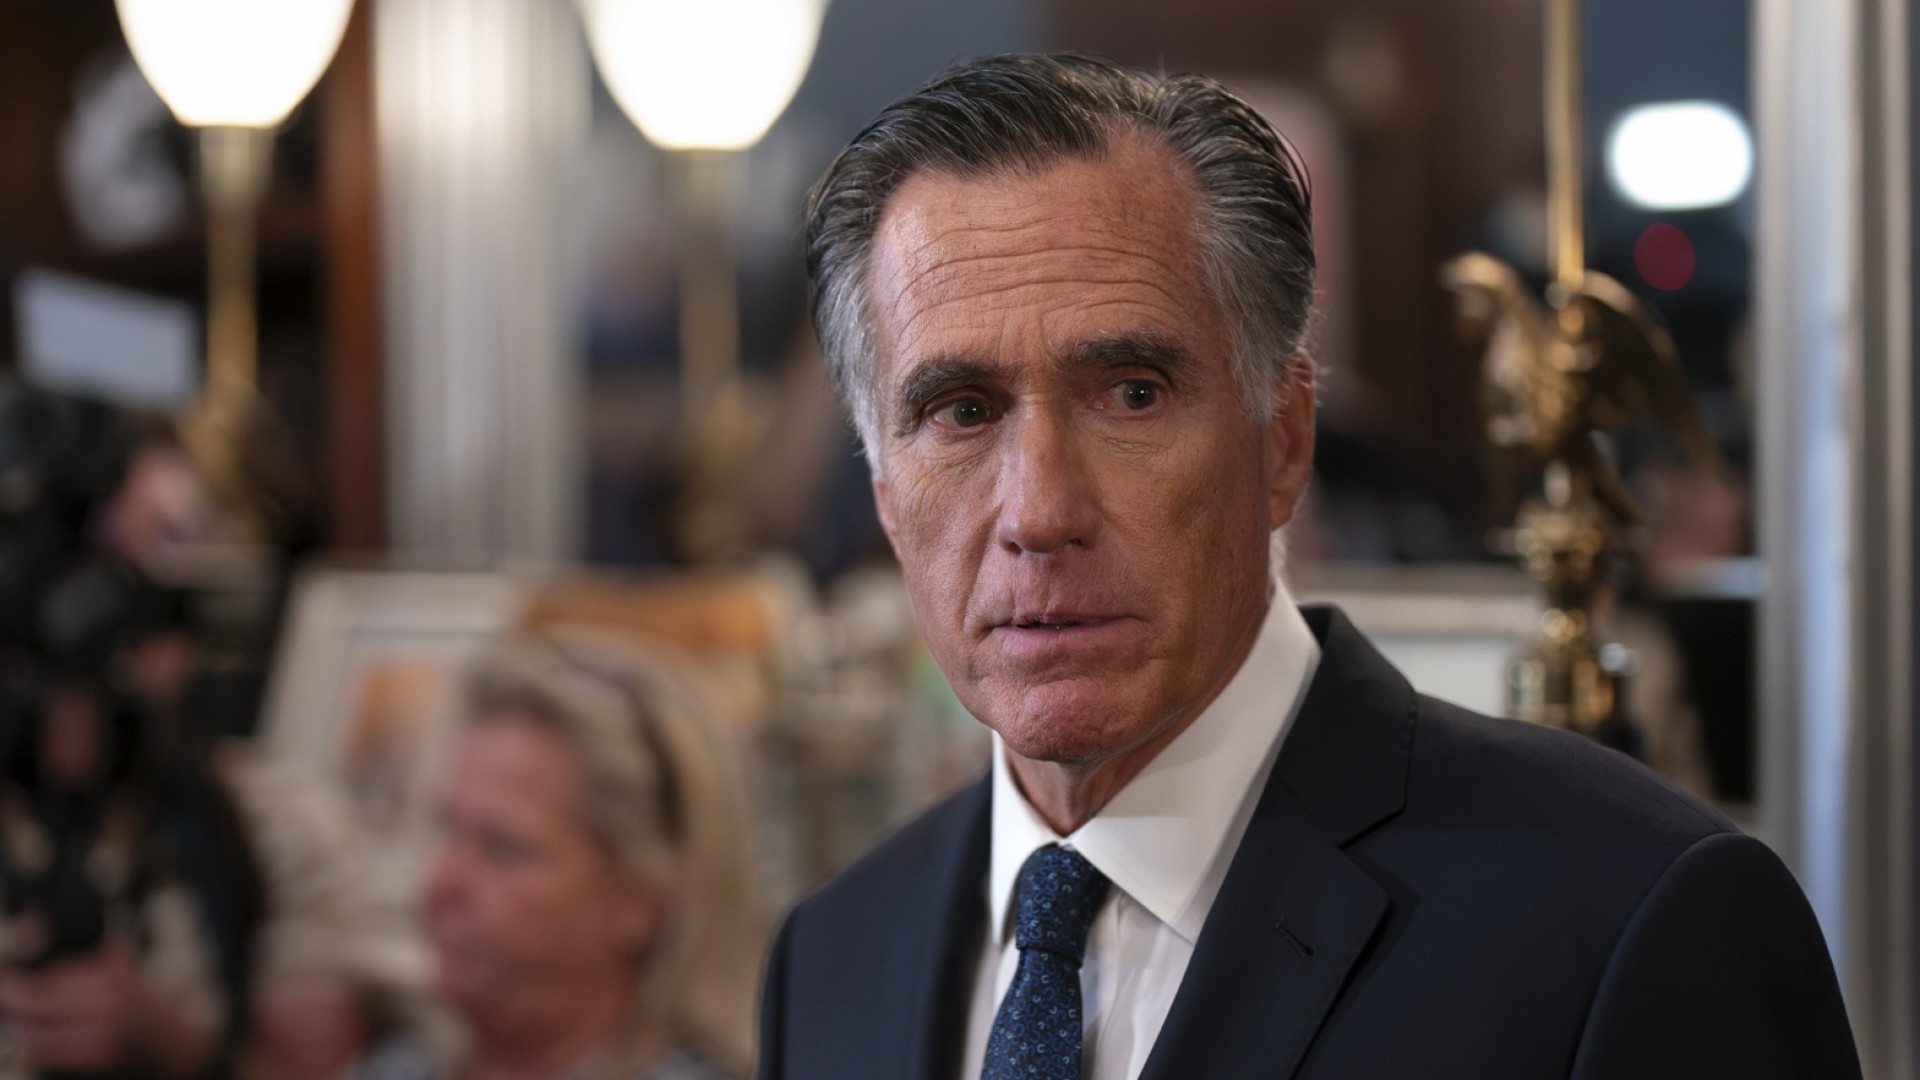 How Mitt Romney’s decision to leave the Senate could affect Congress